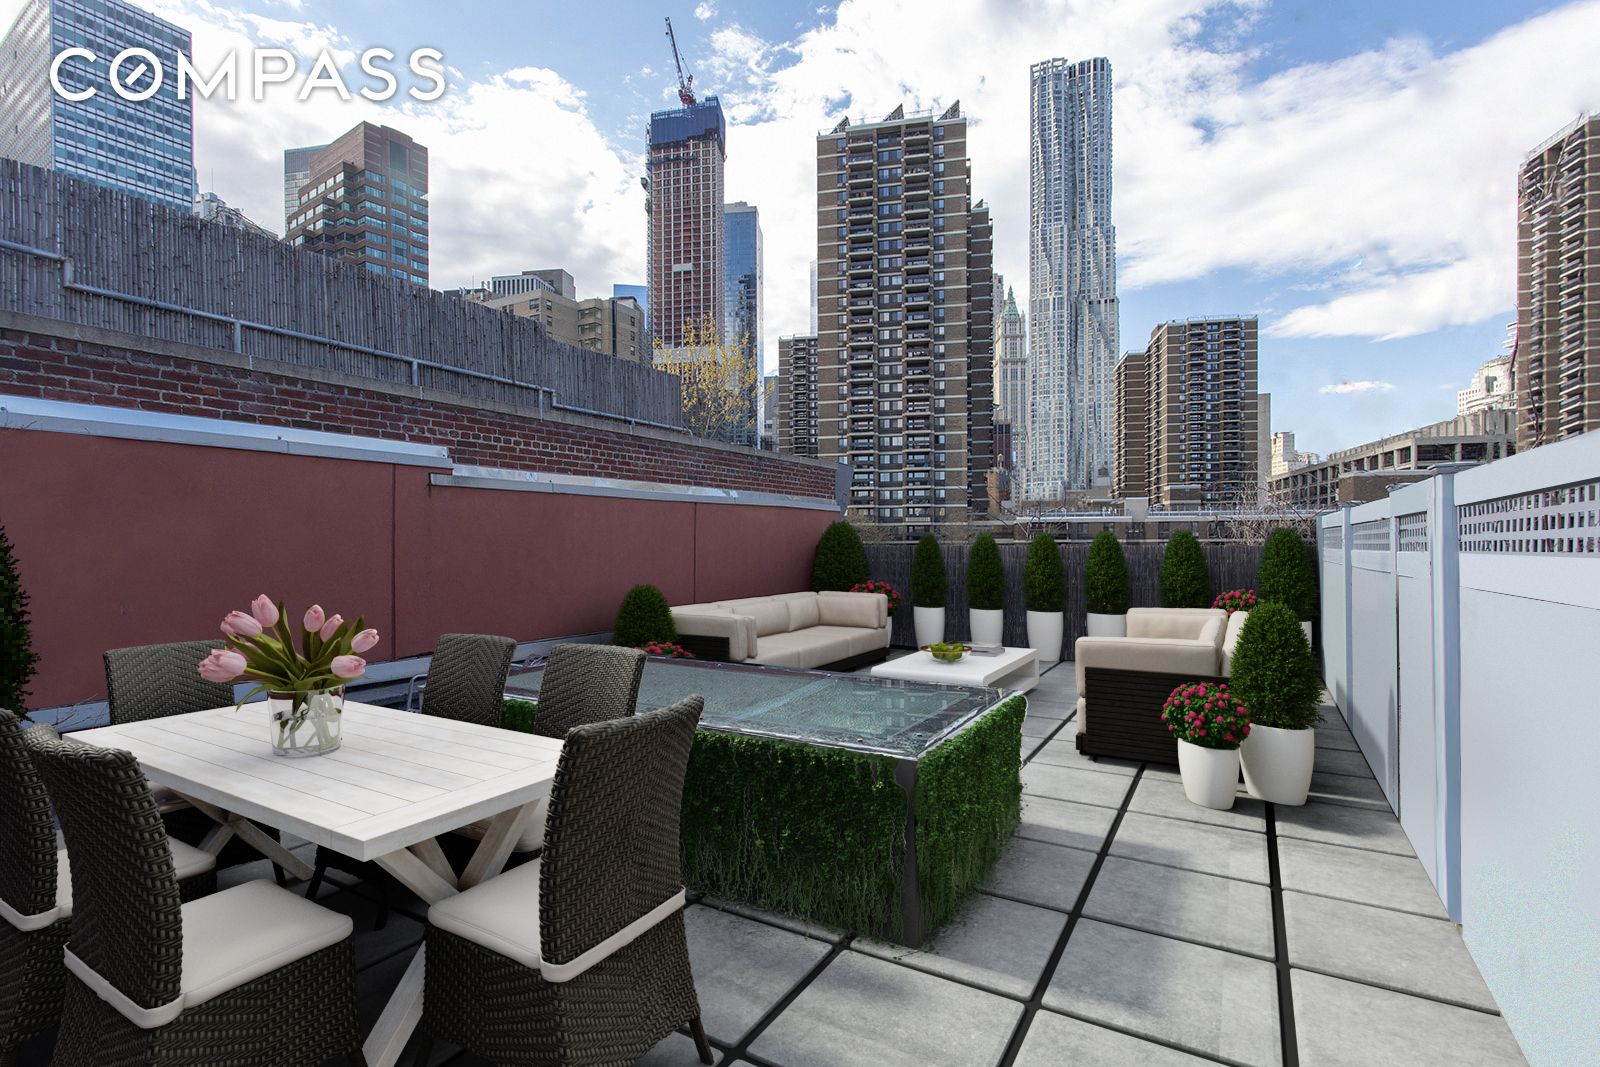 247 Water Street Ph, Financial District, Downtown, NYC - 4 Bedrooms  
3.5 Bathrooms  
8 Rooms - 